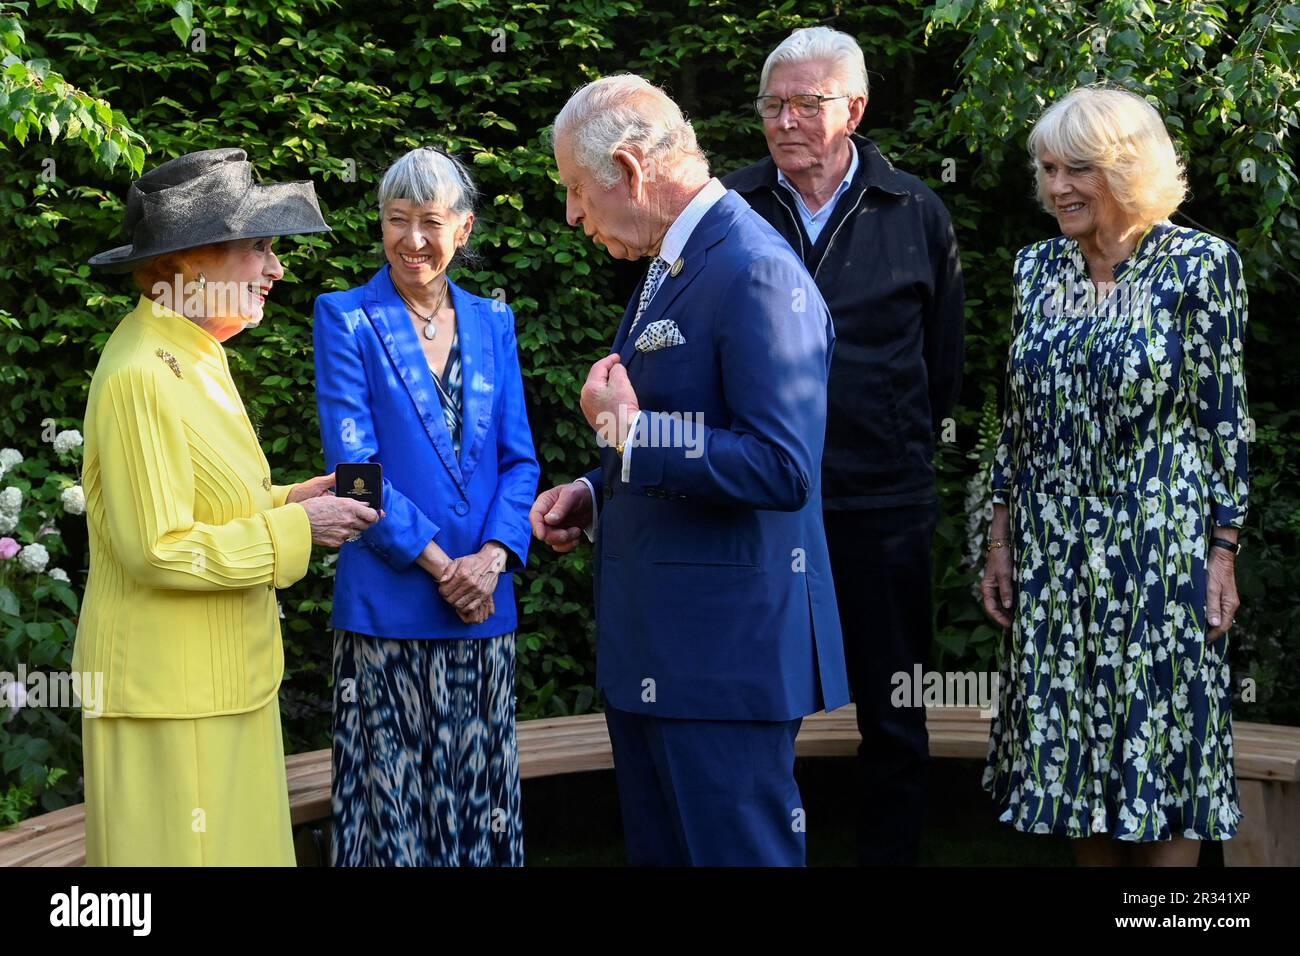 King Charles III and Queen Camilla speak with Janet Fookes (left), Piet Oudolf and Judy Ling Wong after awarding them with the Elizabeth Medal of Honour Award in the Royal Horticultural Society (RHS) Garden of Royal Reflection and Celebration during a visit to the RHS Chelsea Flower, at the Royal Hospital Chelsea, London. Picture date: Monday May 22, 2023. Stock Photo